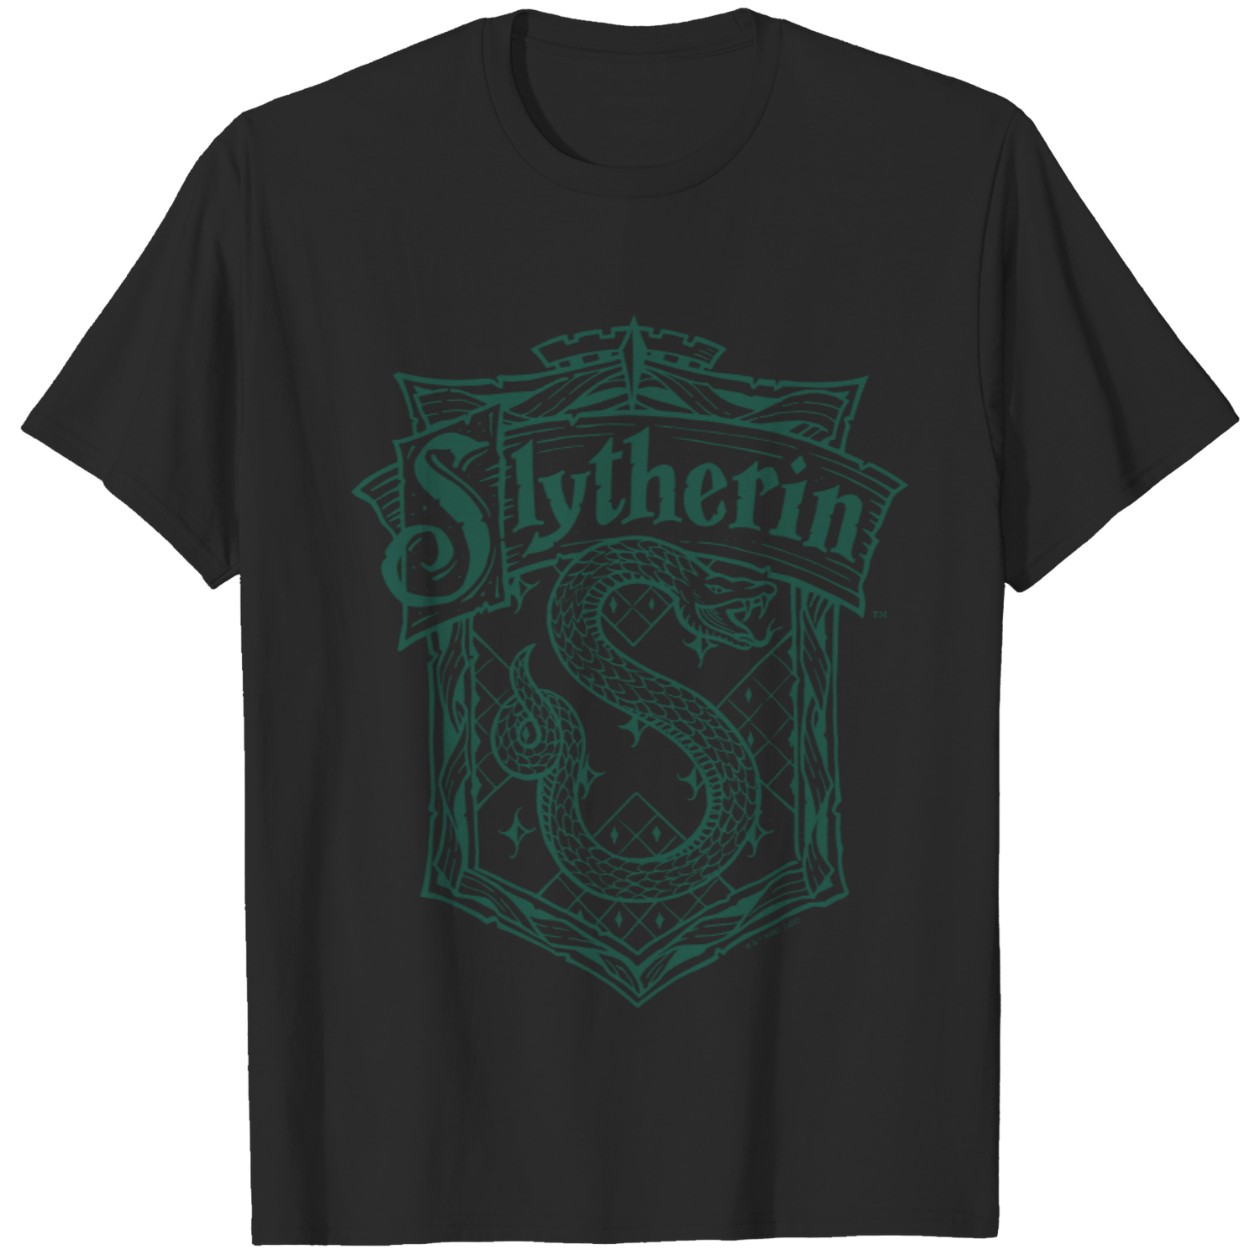 Classic Slytherin Crest Graphic Tee IYT